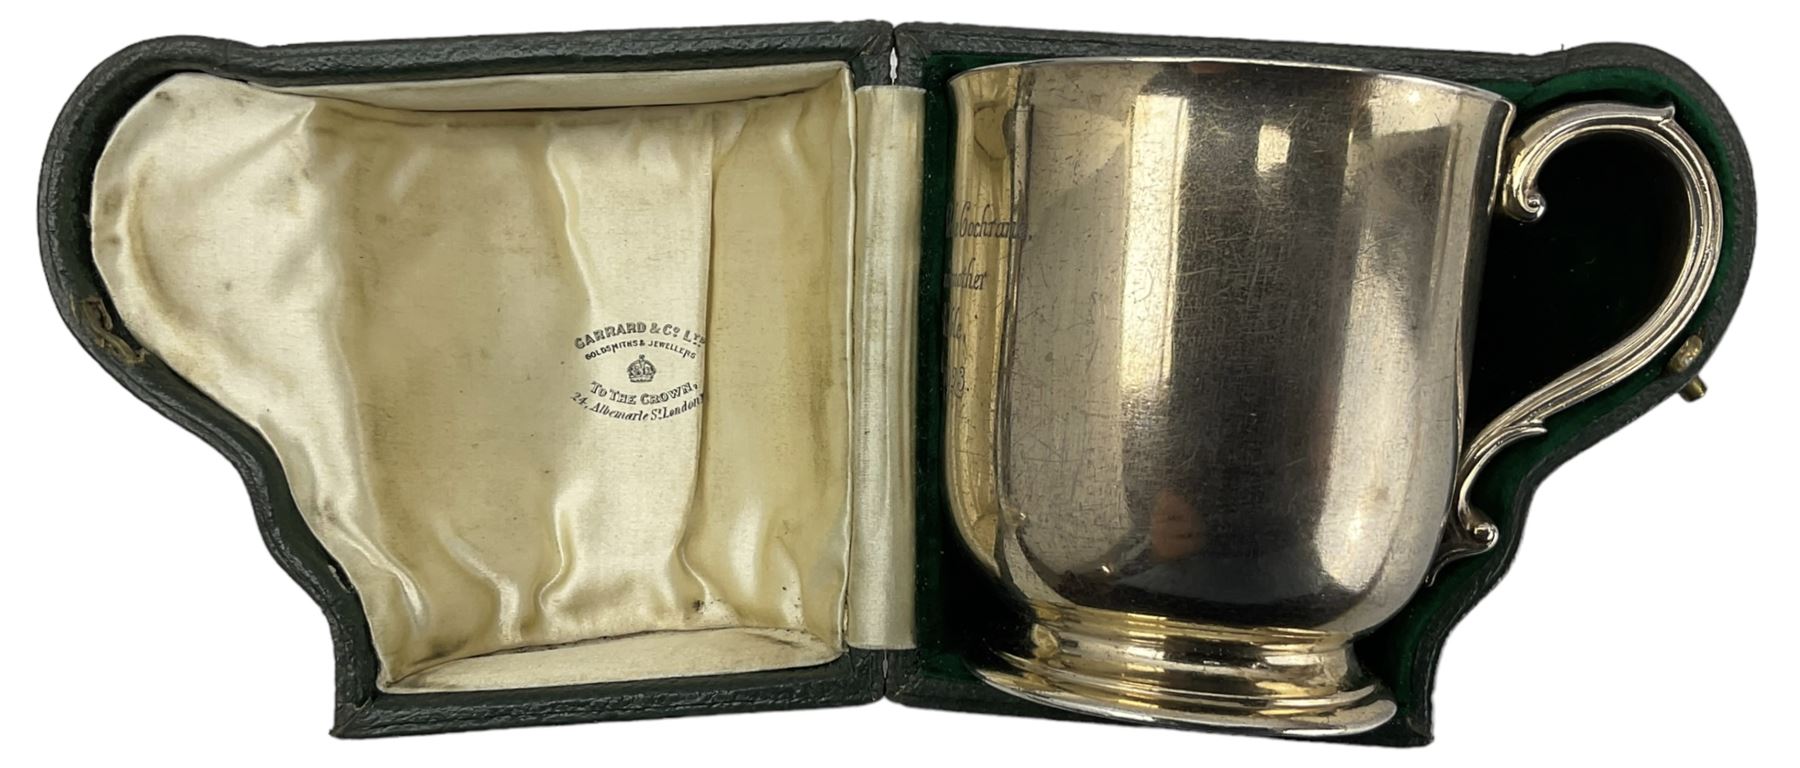 Silver christening mug with gilded interior and inscription London 1917 Maker Garrard & Co - Image 5 of 6